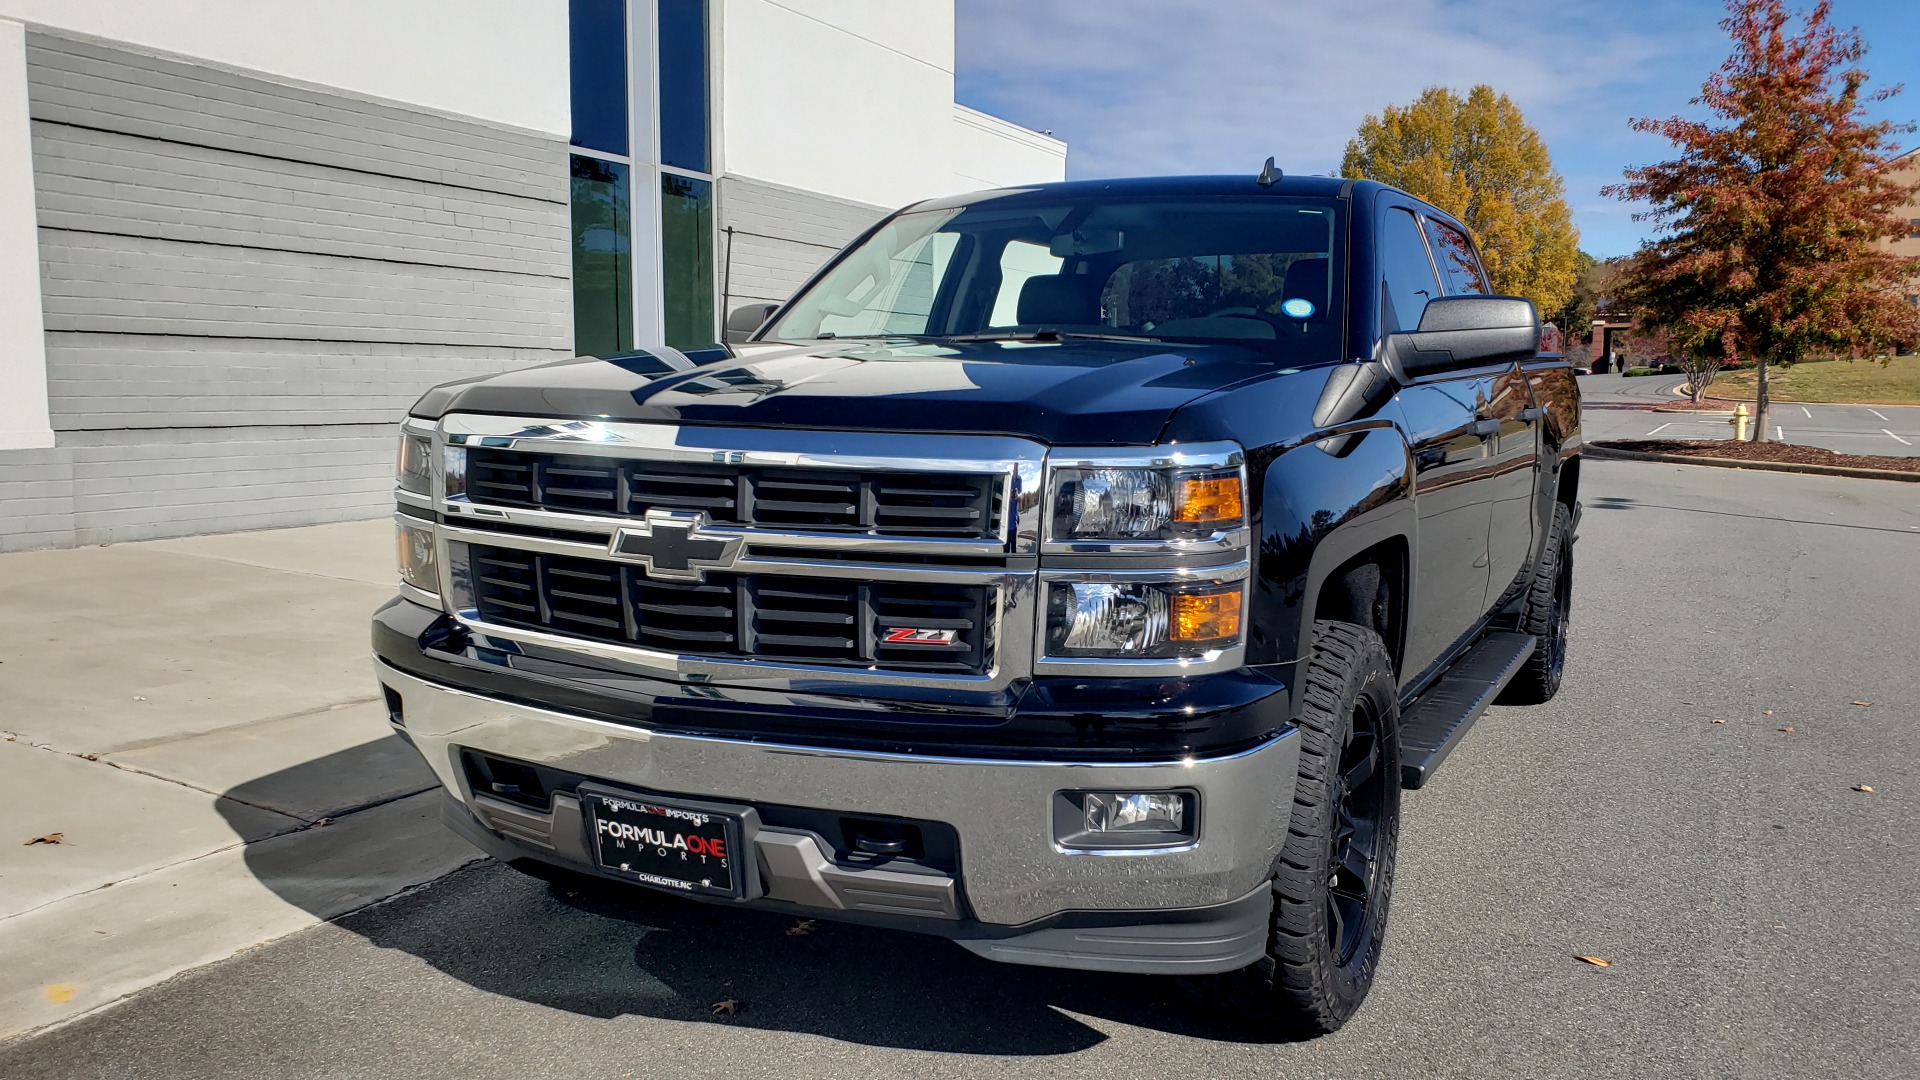 Used 2014 Chevrolet SILVERADO 1500 LT CREWCAB Z71 2LT / 5.3L V8 / AUTO / CONV PKG / TOW / REARVIEW for sale Sold at Formula Imports in Charlotte NC 28227 2